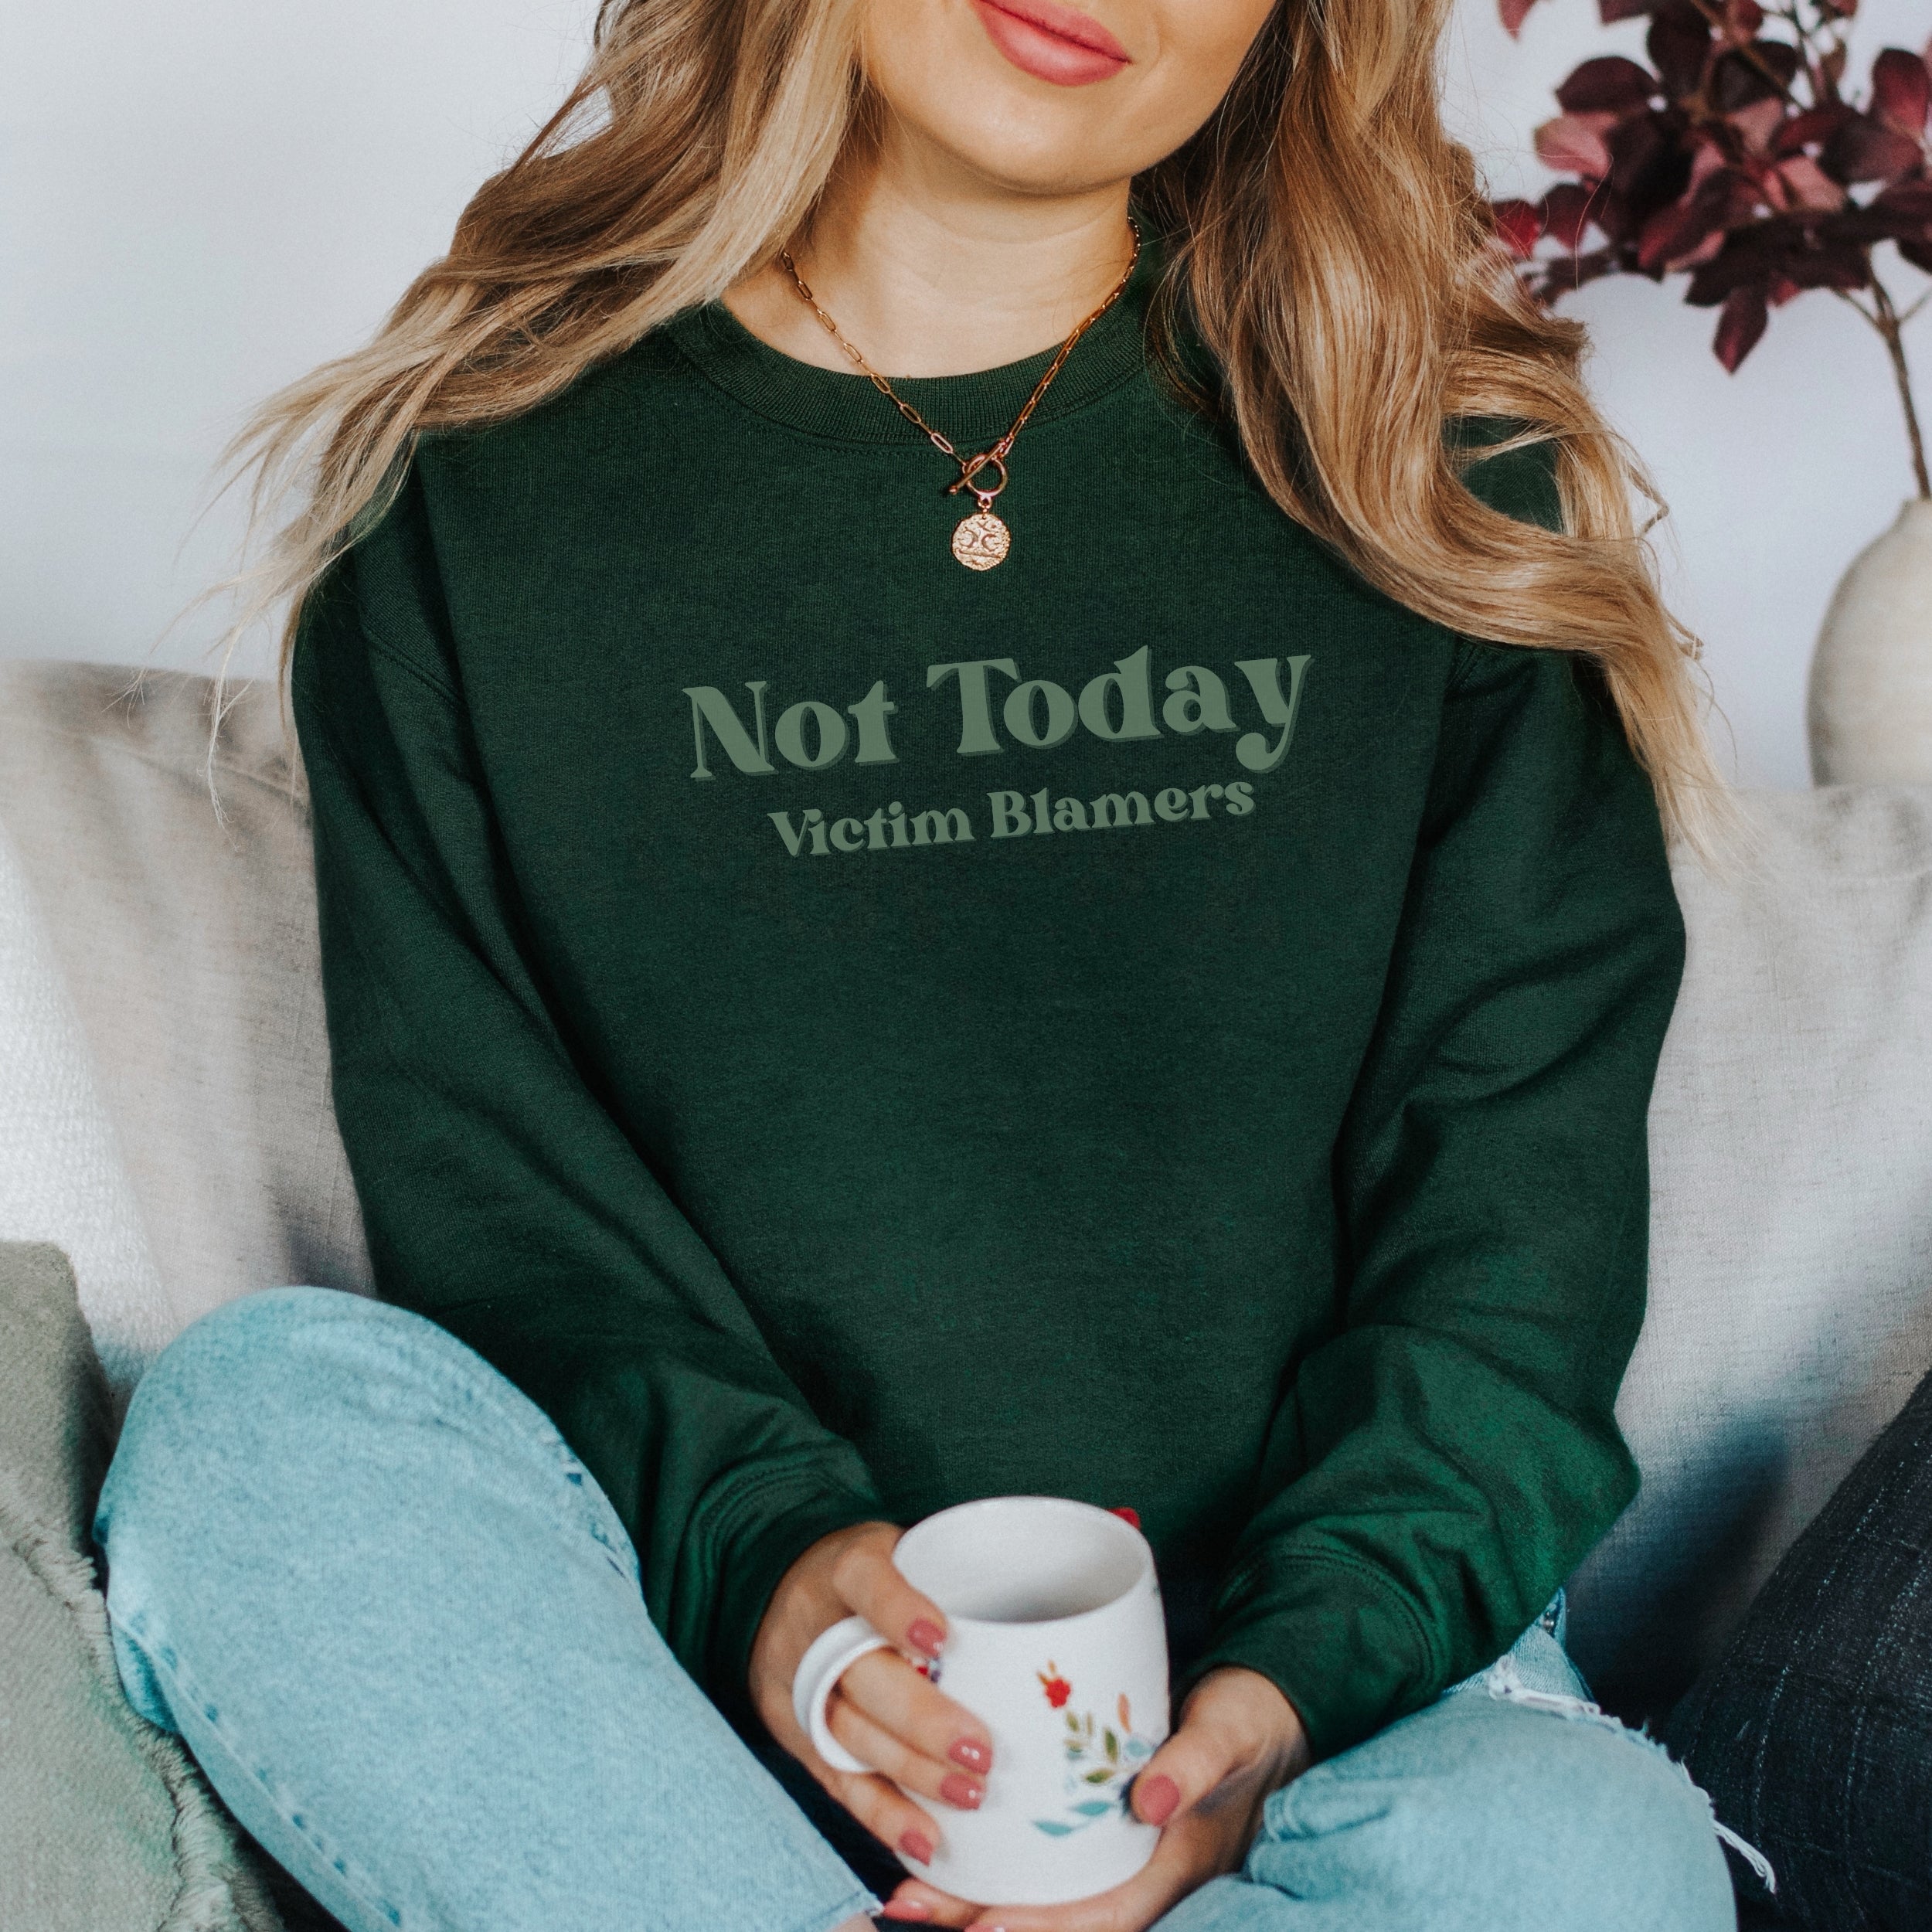 The front of the Forest Green sweatshirt proudly displays the phrase "Not Today Victim Blamers" in a Spruce colored bold and eye-catching font. This message serves as a reminder that we reject victim-blaming and support those who have faced injustice.